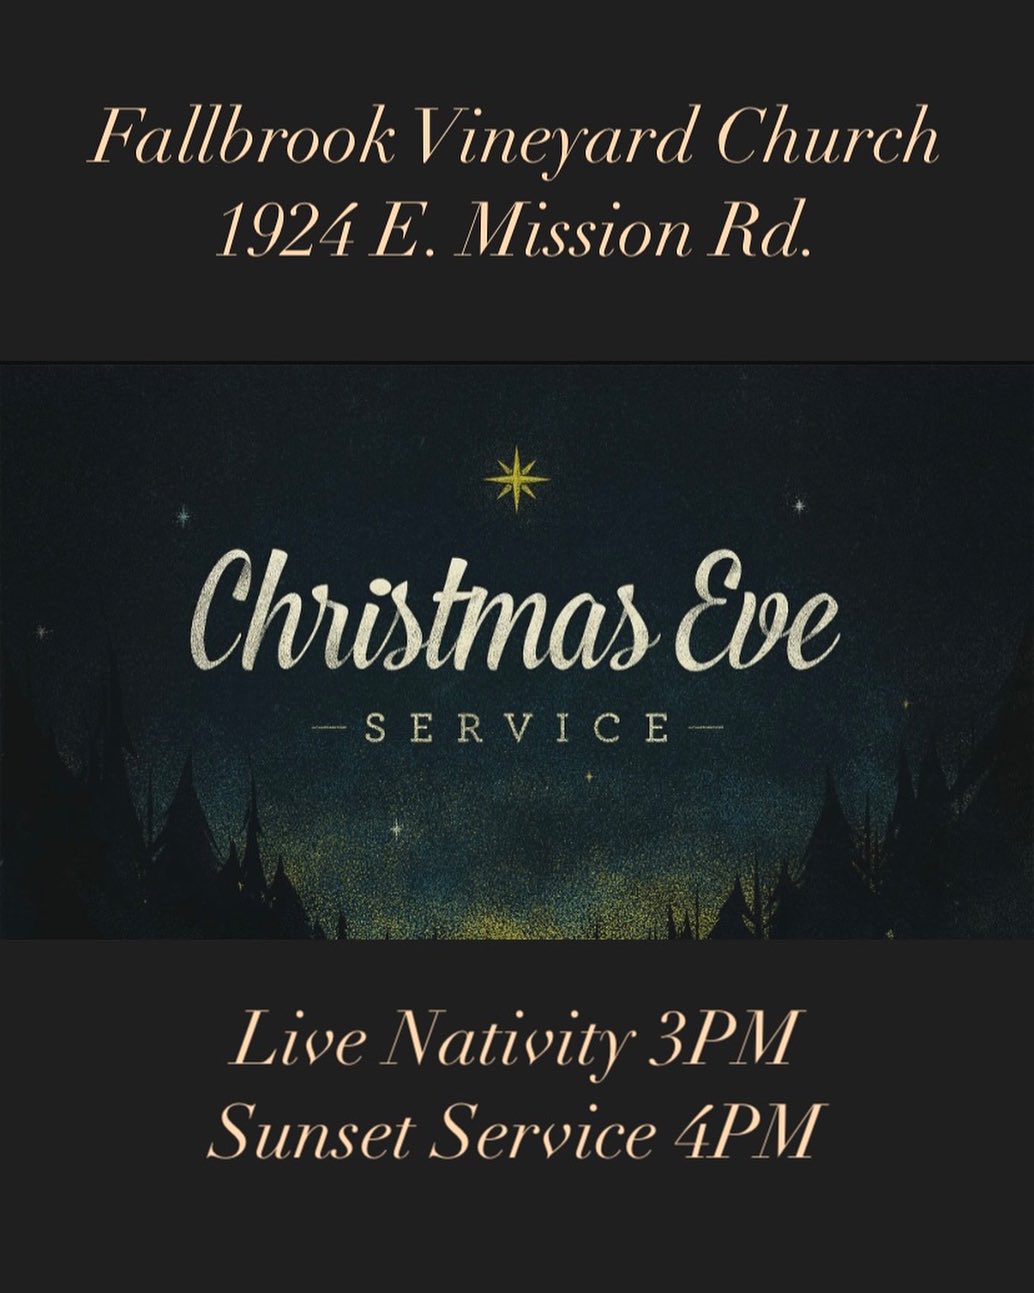 Invite Someone to Christmas Eve at Fallbrook Vineyard Church! Live Nativity 3PMSunset Service 4PM1924 E. Mission RdA unique and memorable evening celebrating the [...]
</p>
</body></html>